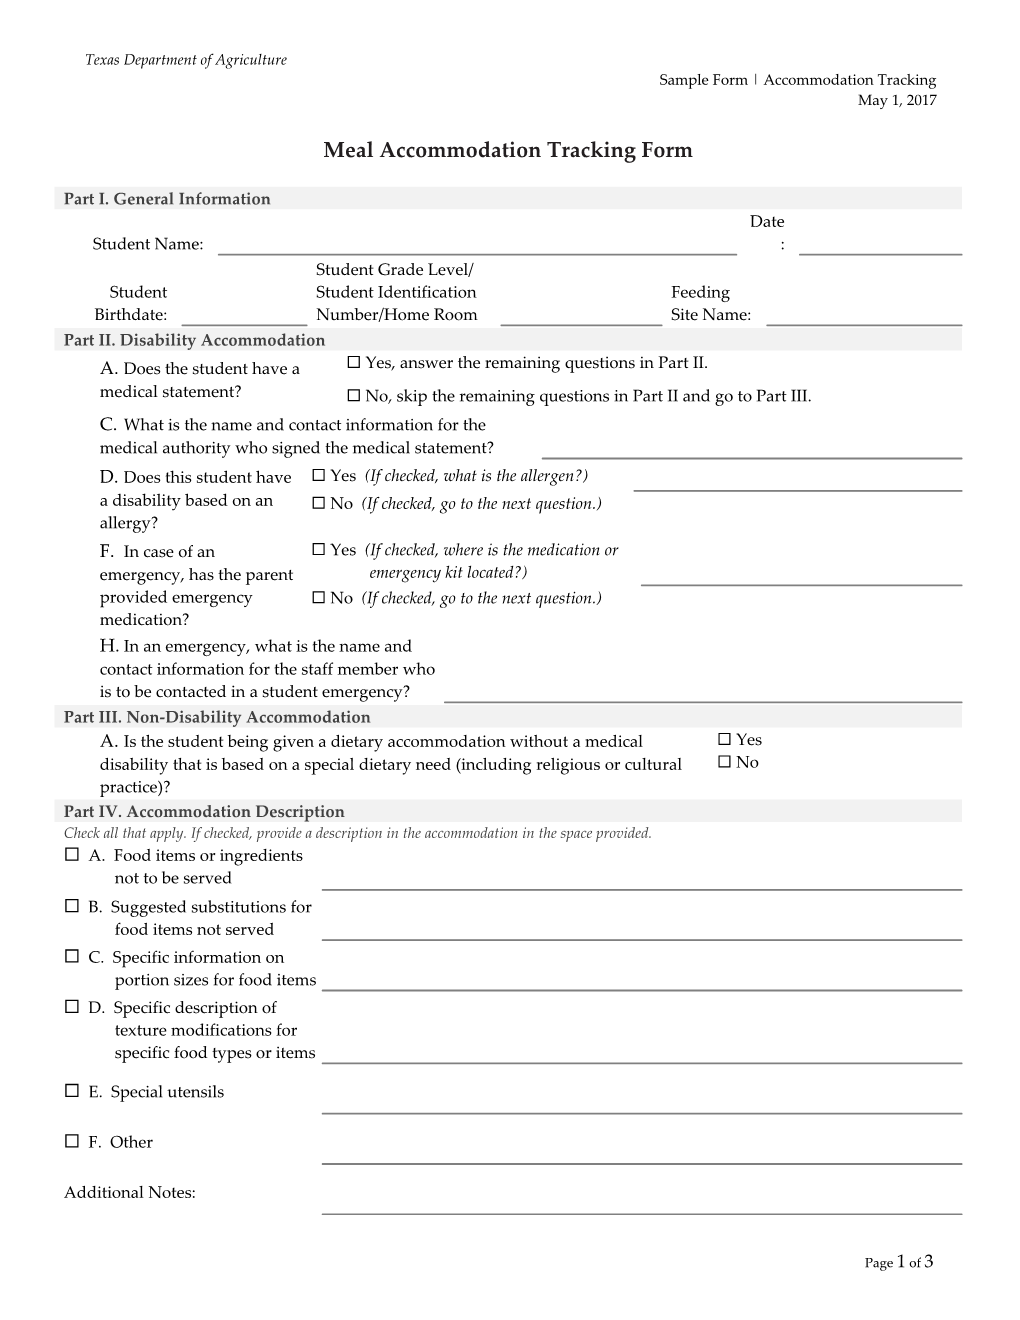 Meal Accommodation Tracking Form